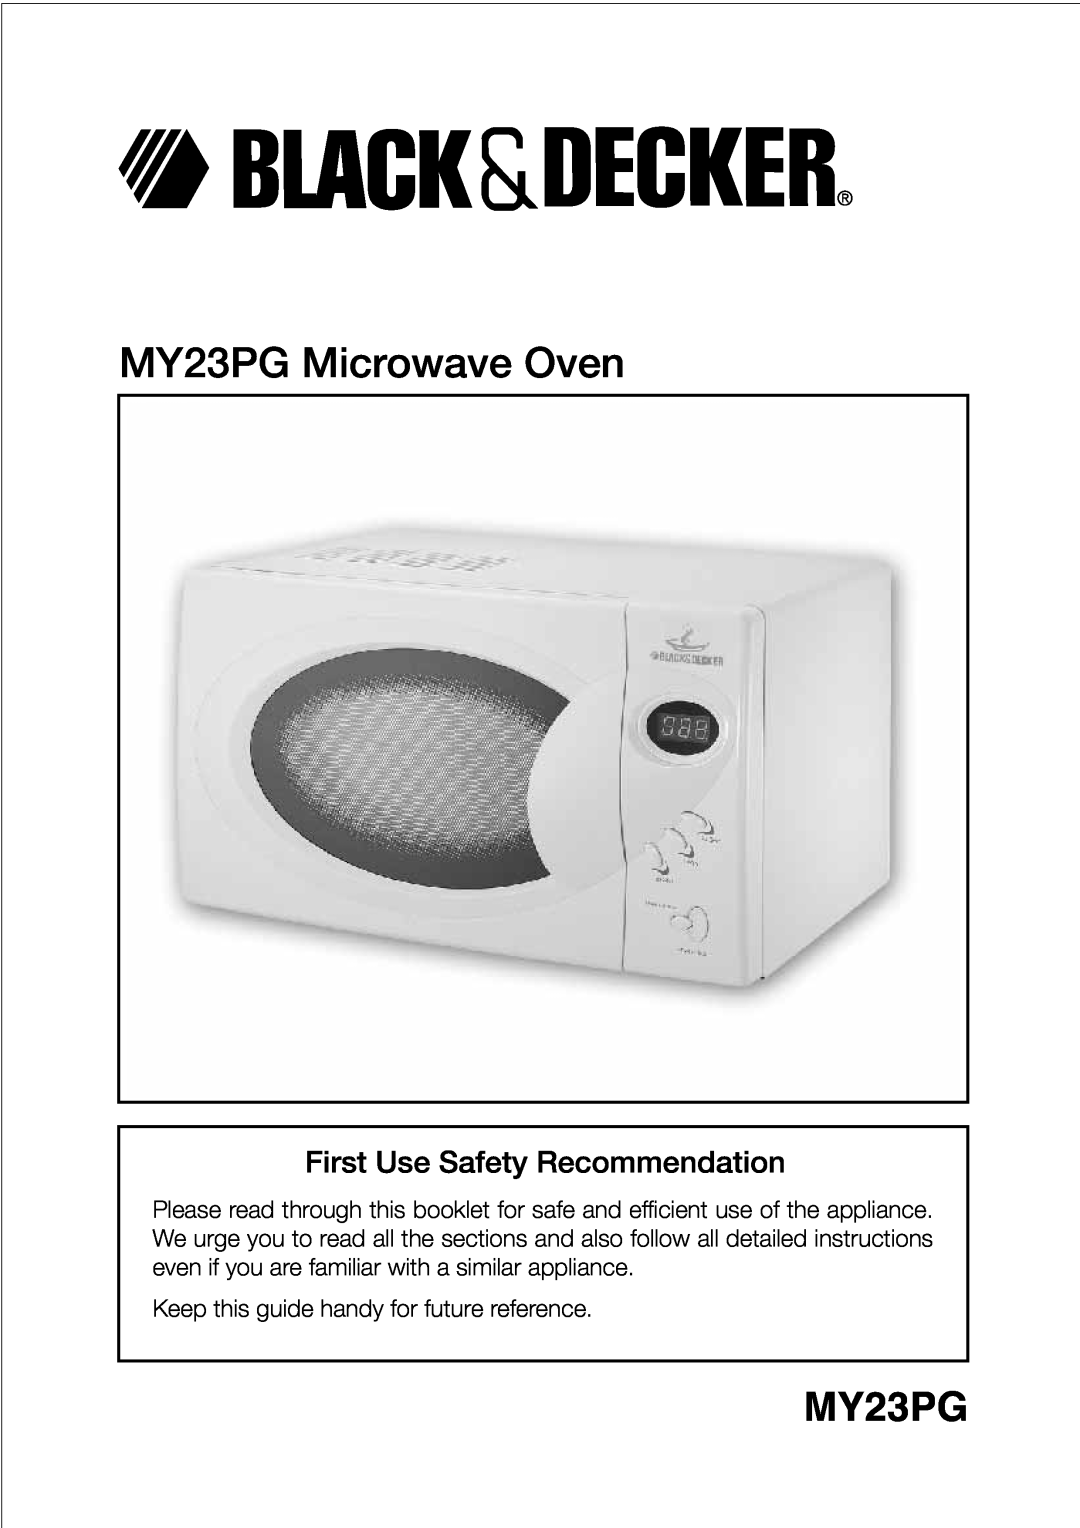 Black & Decker manual MY23PG Microwave Oven, First Use Safety Recommendation 